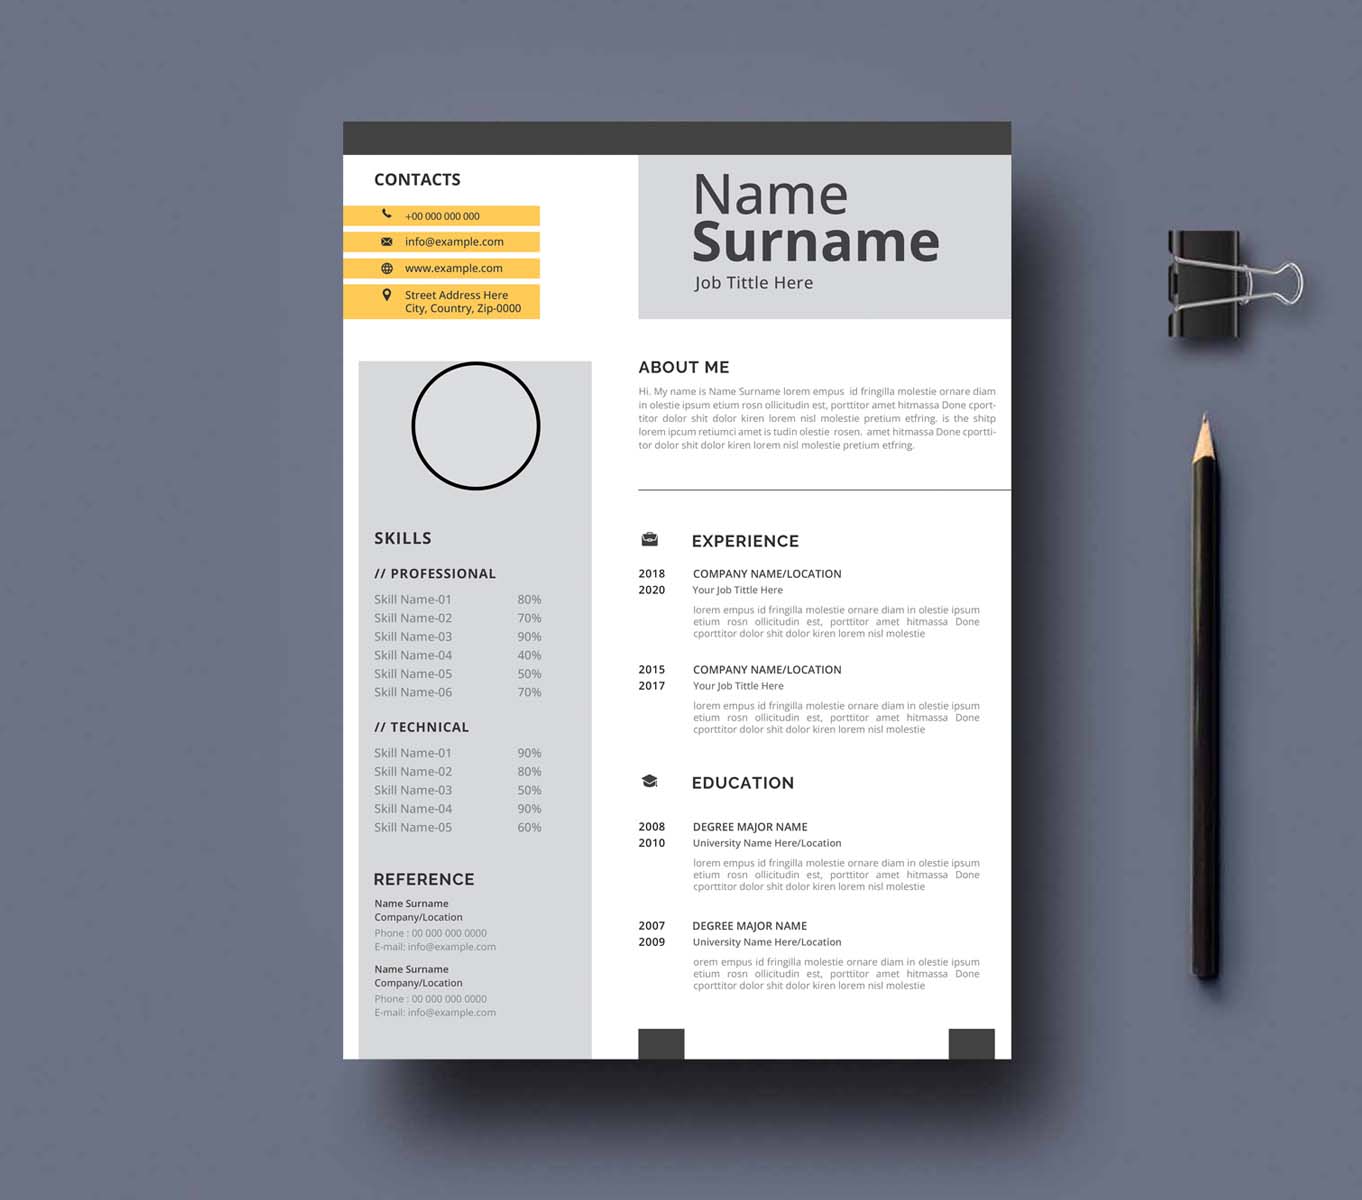 Clean and modern resume template with a pencil.